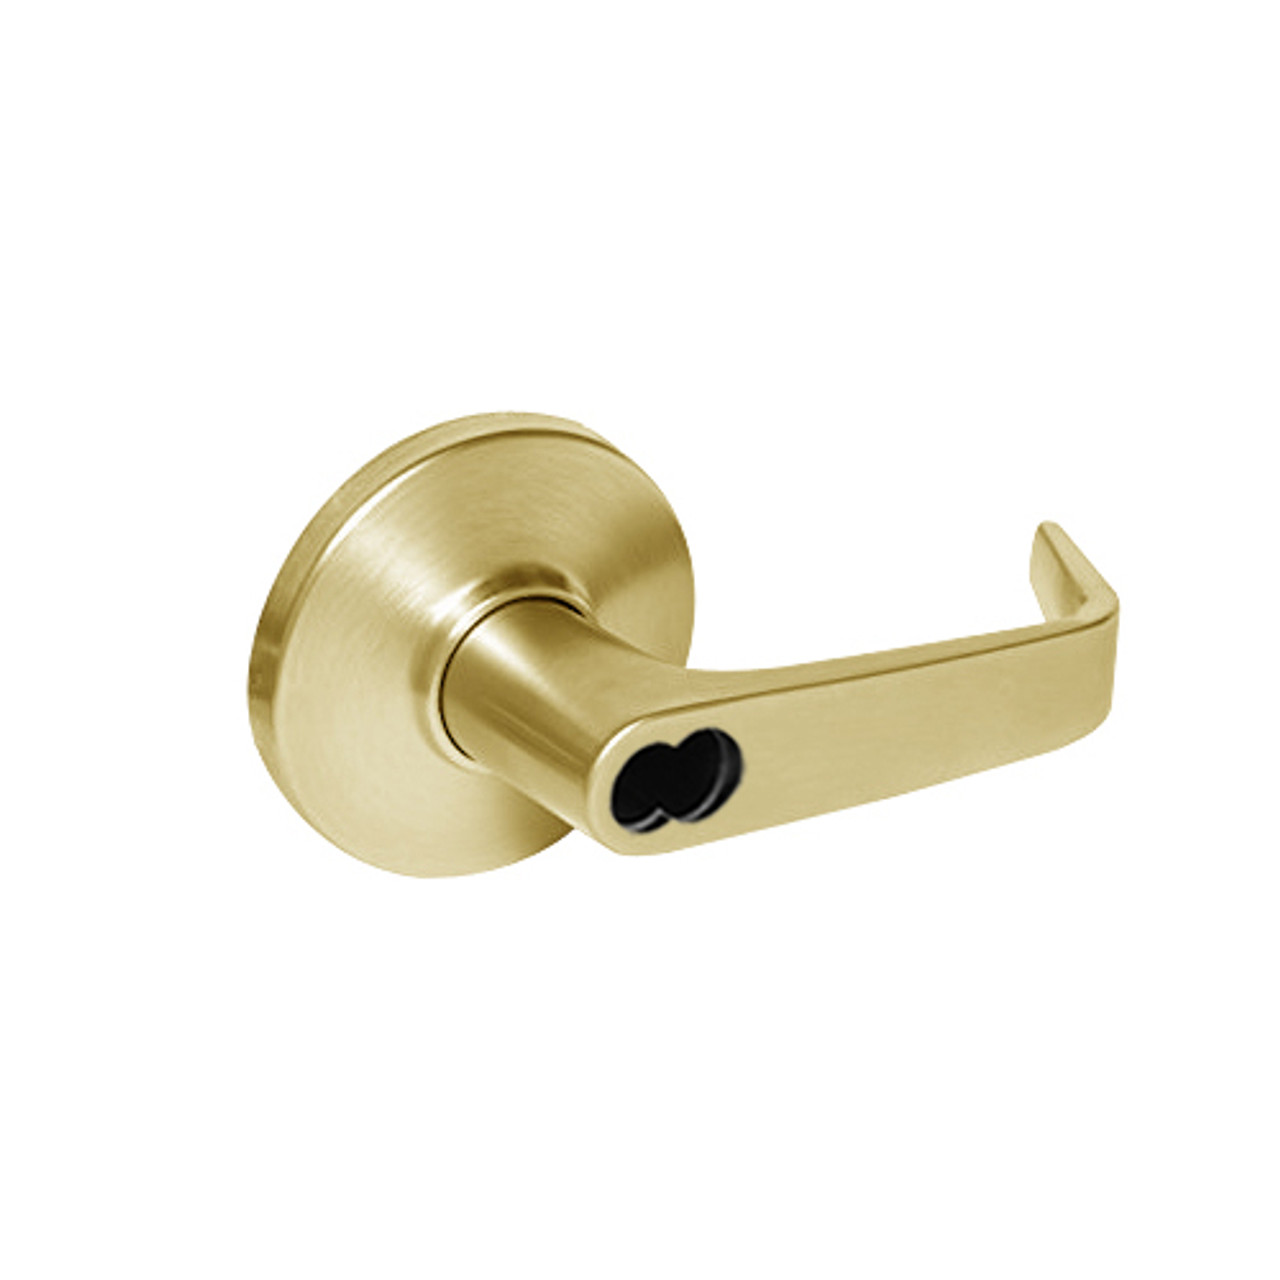 9K37A15DS3605 Best 9K Series Dormitory or Storeroom Cylindrical Lever Locks with Contour Angle with Return Lever Design Accept 7 Pin Best Core in Bright Brass